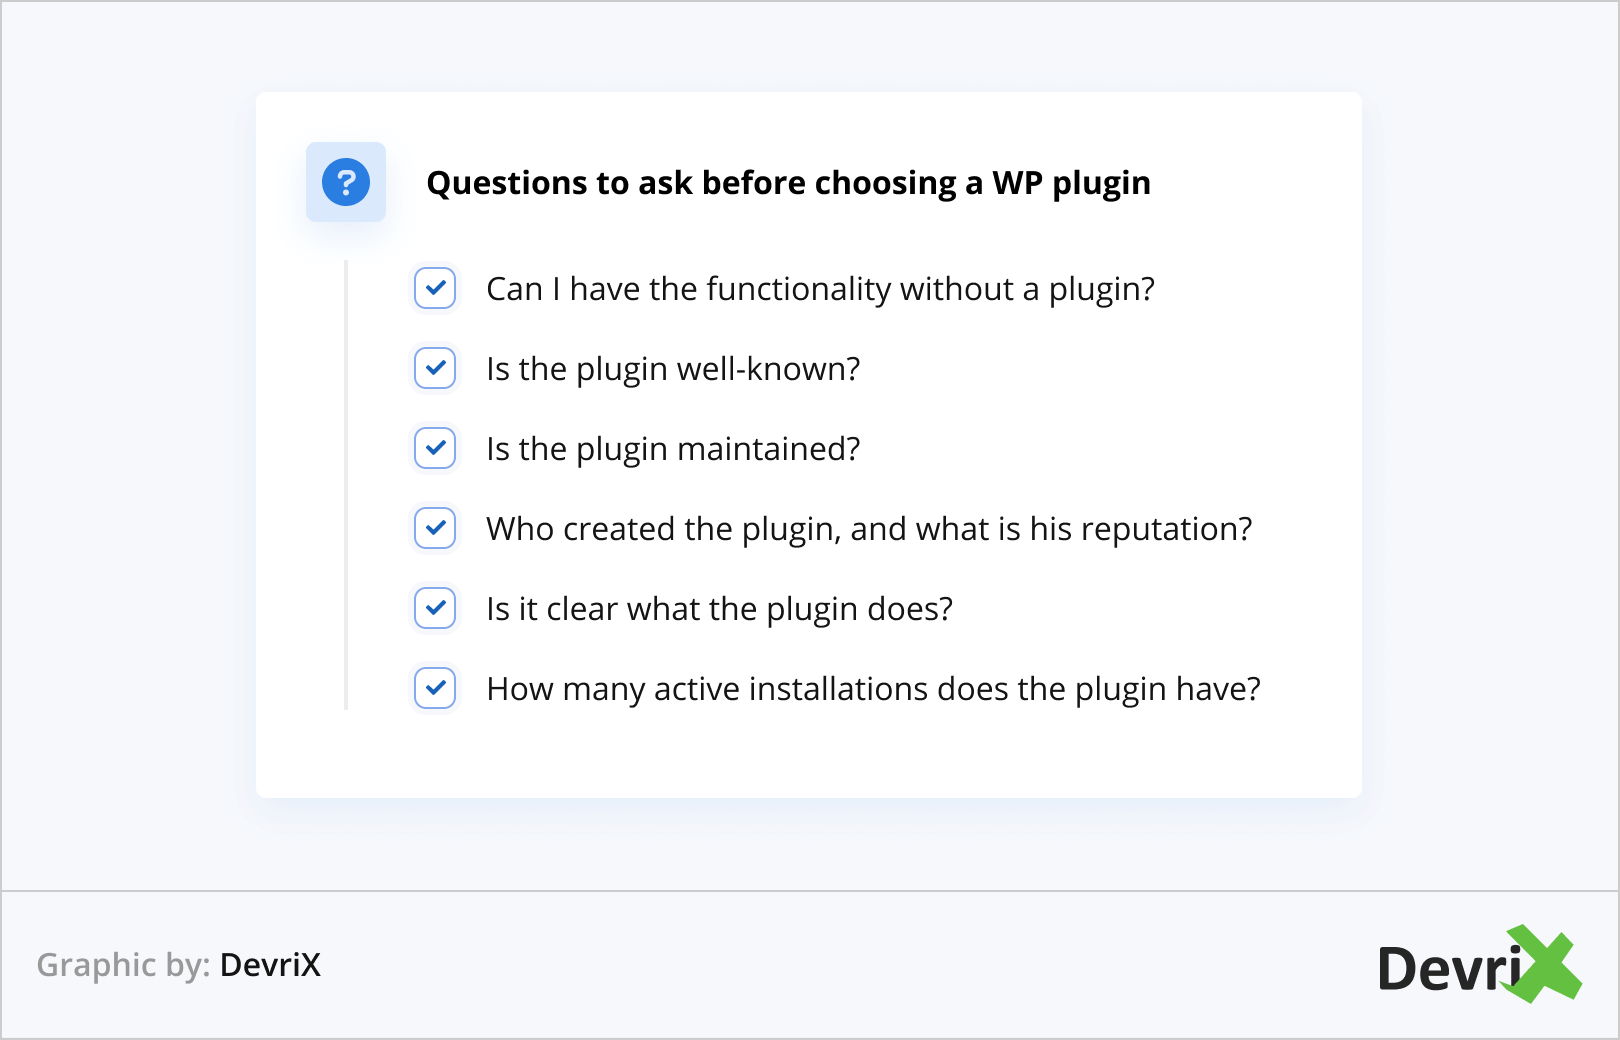 Questions to ask before choosing a WP plugin